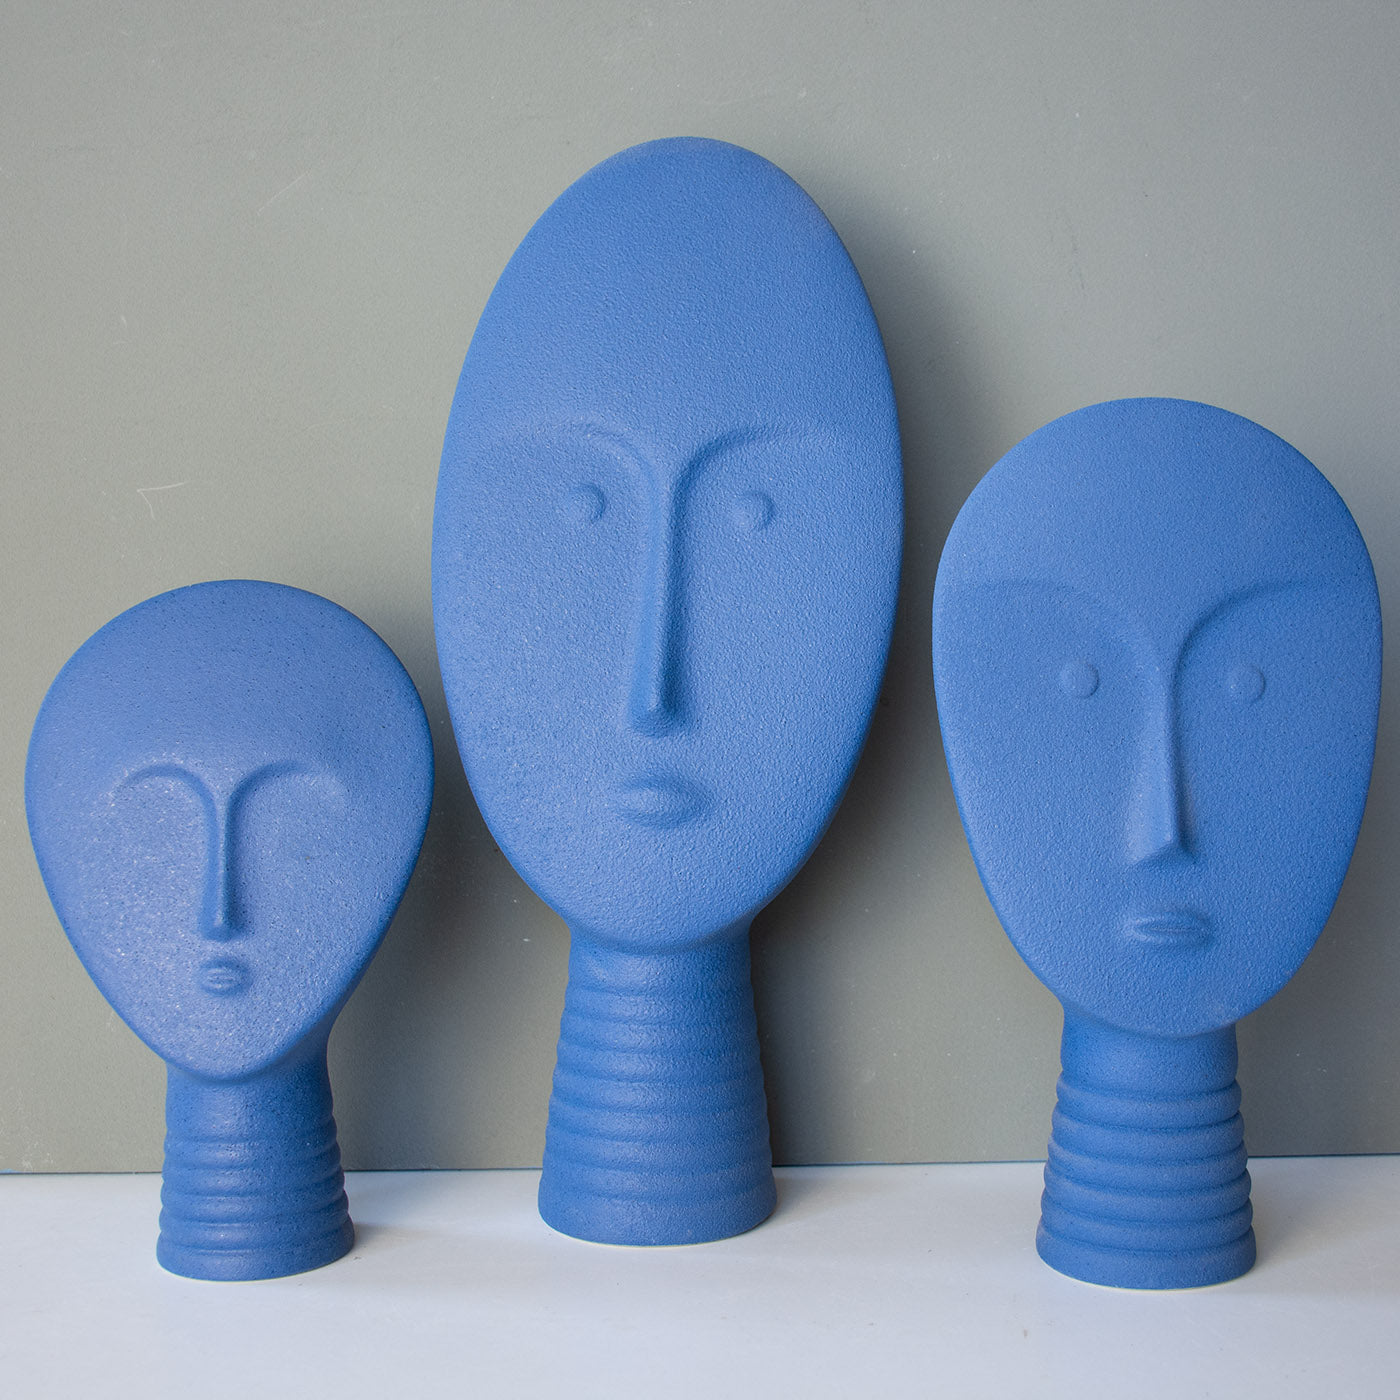 Set of 3 Indian Masks by Giuseppe Bucco - Alternative view 3